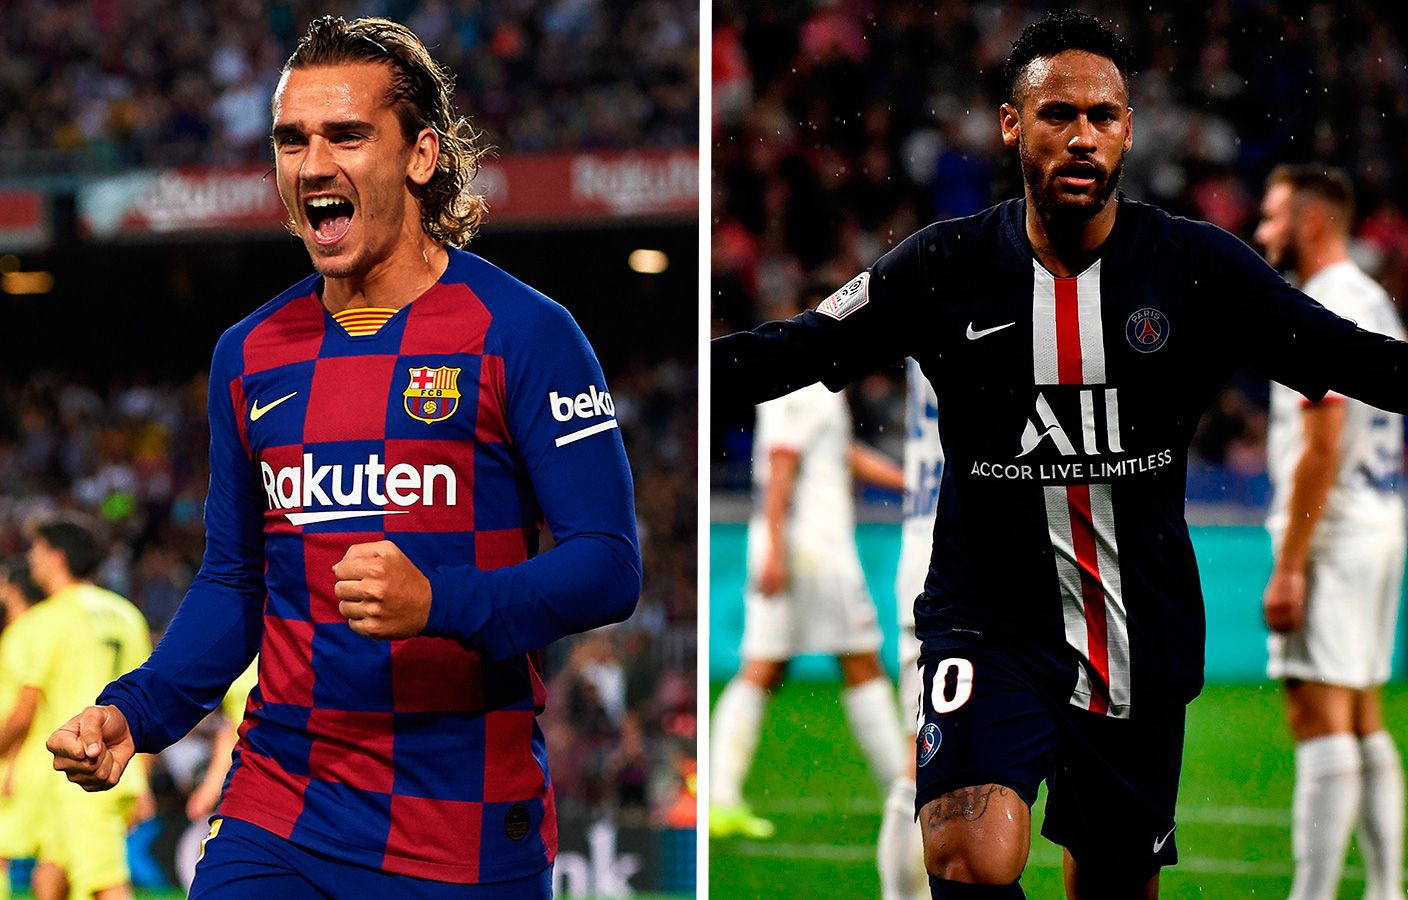 Griezmann And Neymar, players of the Barça and of the PSG